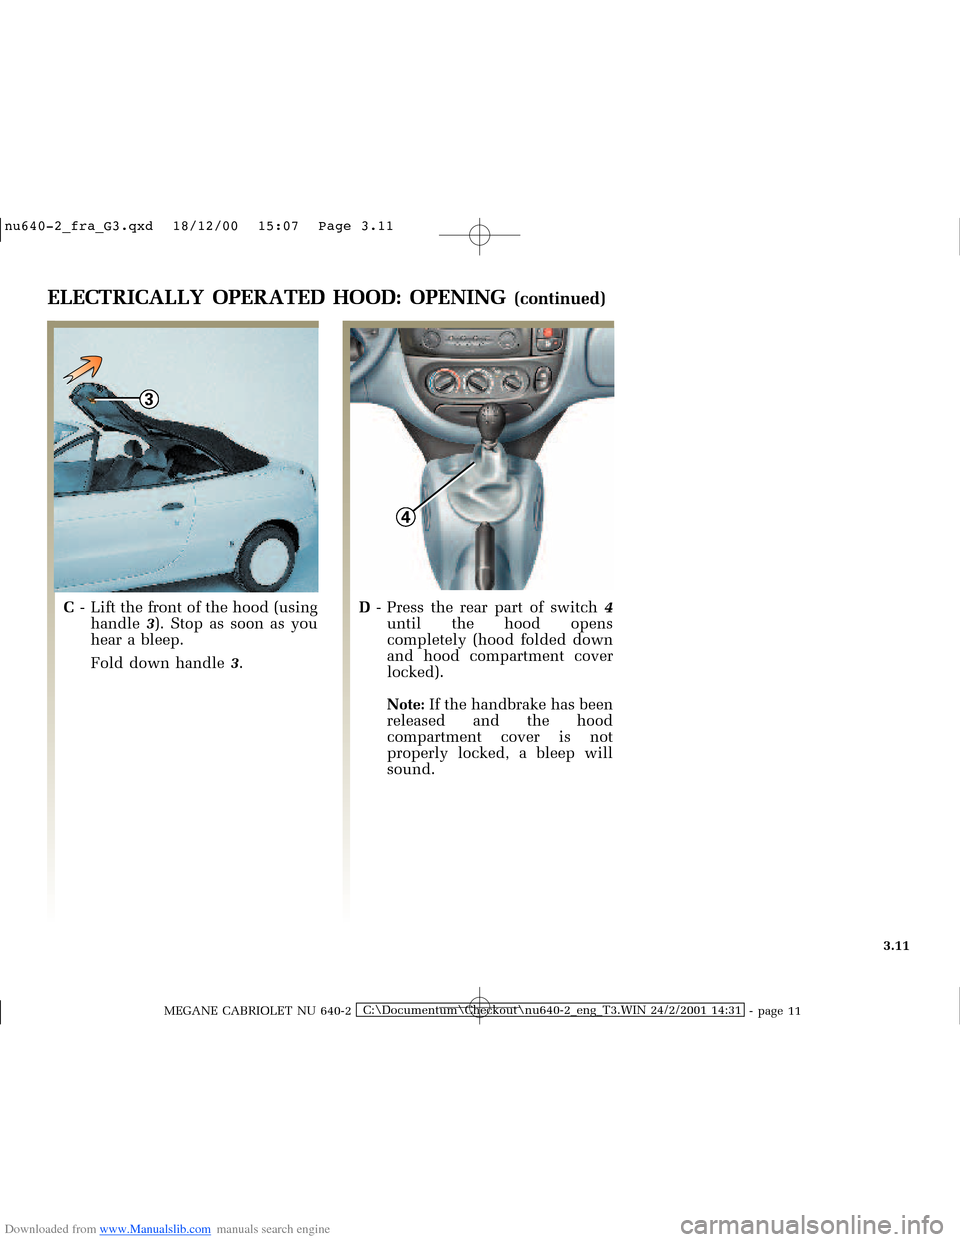 RENAULT MEGANE 2000 X64 / 1.G Owners Manual Downloaded from www.Manualslib.com manuals search engine 3
4
�Q�X������B�I�U�D�B�*���T�[�G� � ��������� � ������ � �3�D�J�H� ����
MEGANE CABRIOLET NU 640-2C:\Documentum\